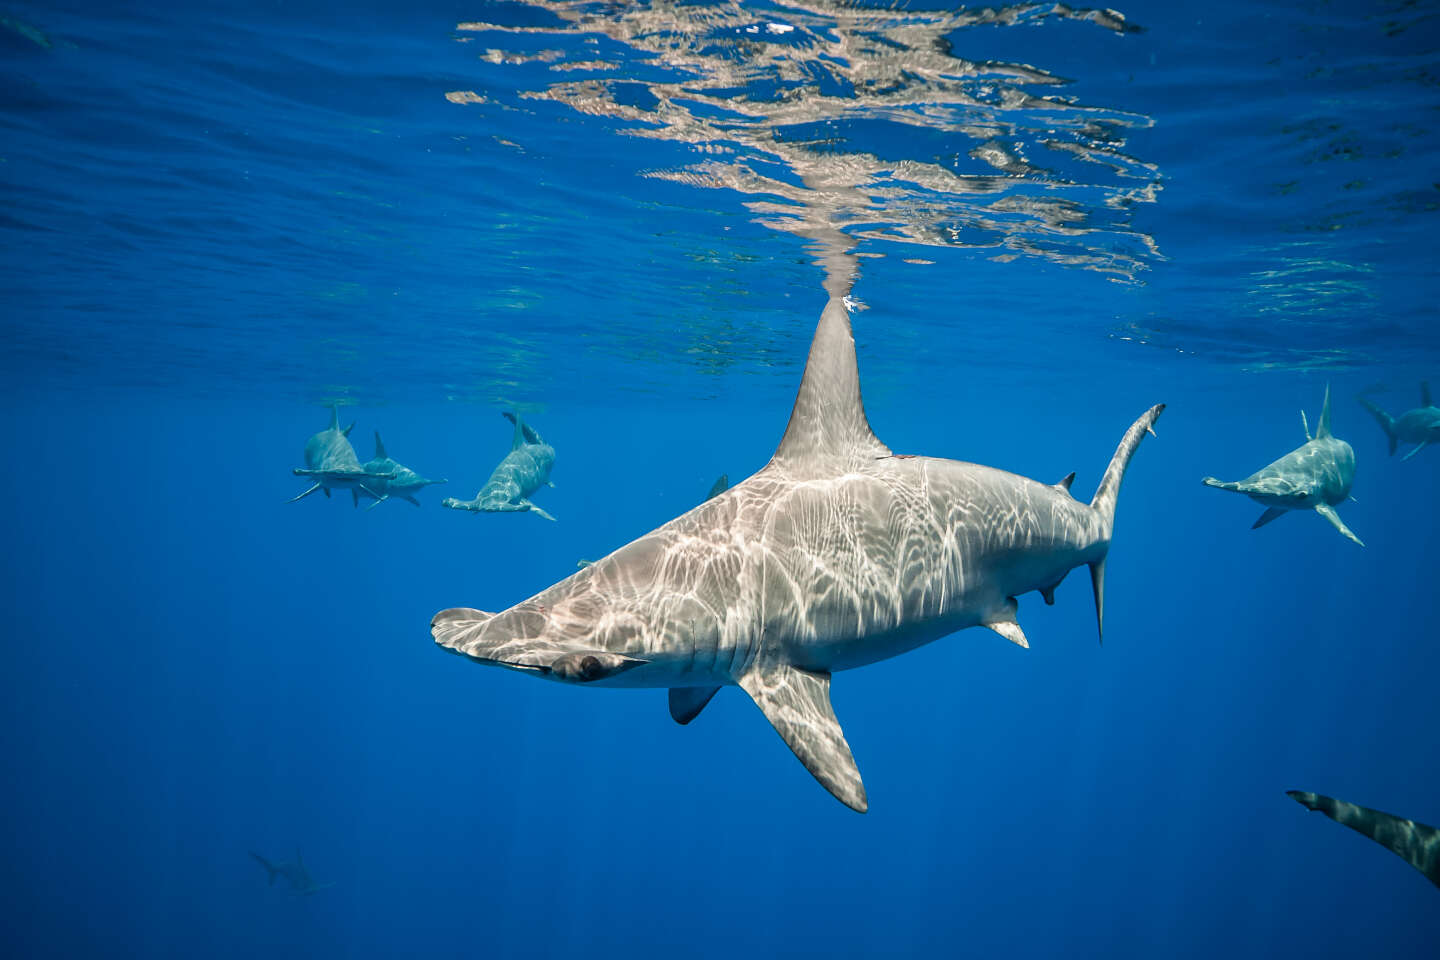 To endure the cold of deep waters, hammerhead sharks stop breathing